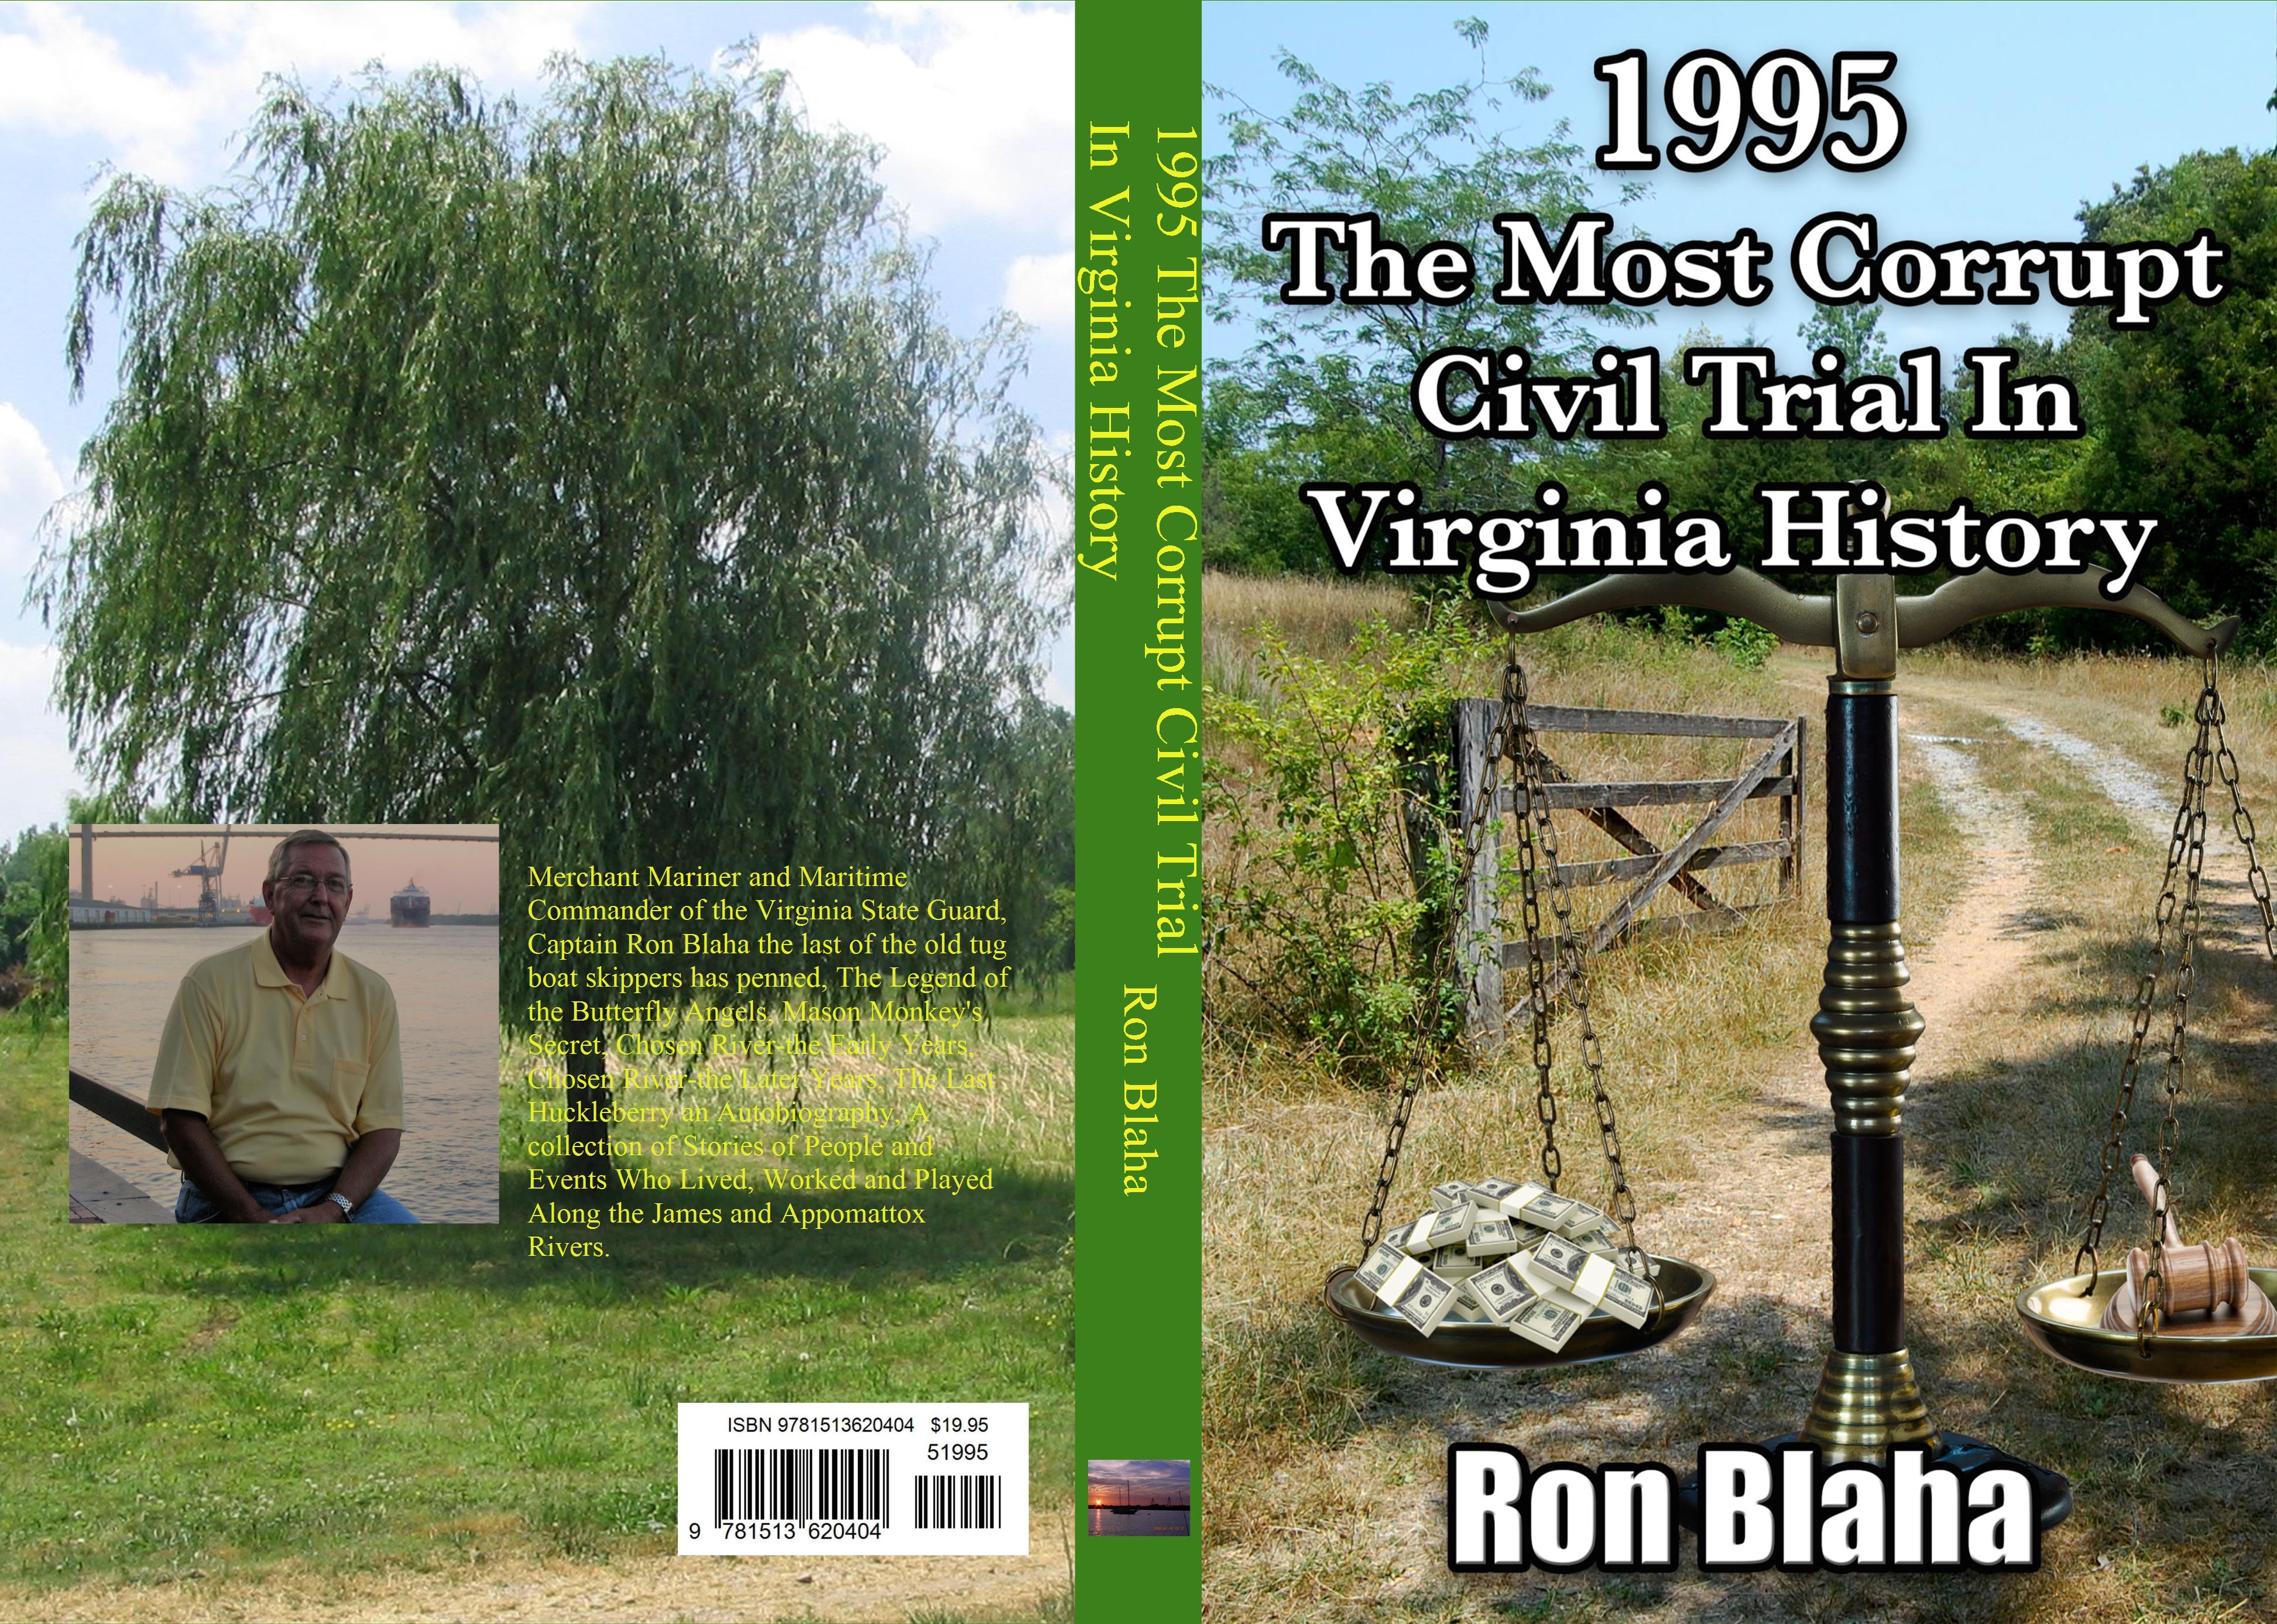 1995 The Most Corrupt Civil Trial In Virginia History cover image